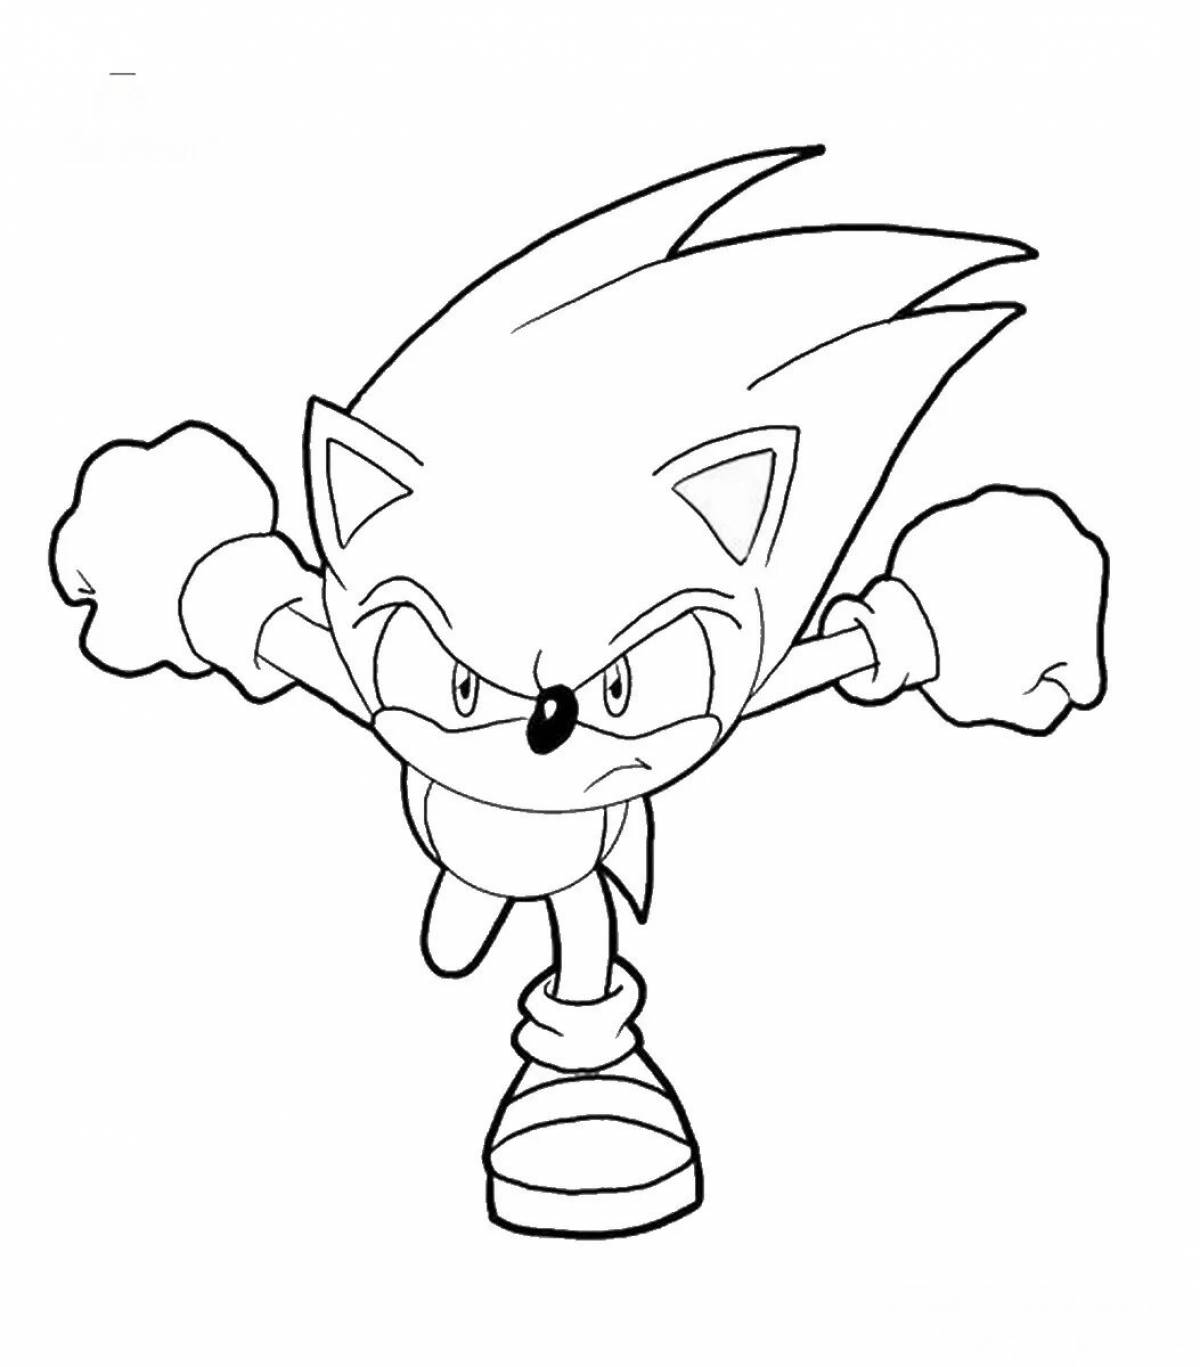 Tempting sonic the hedgehog coloring book